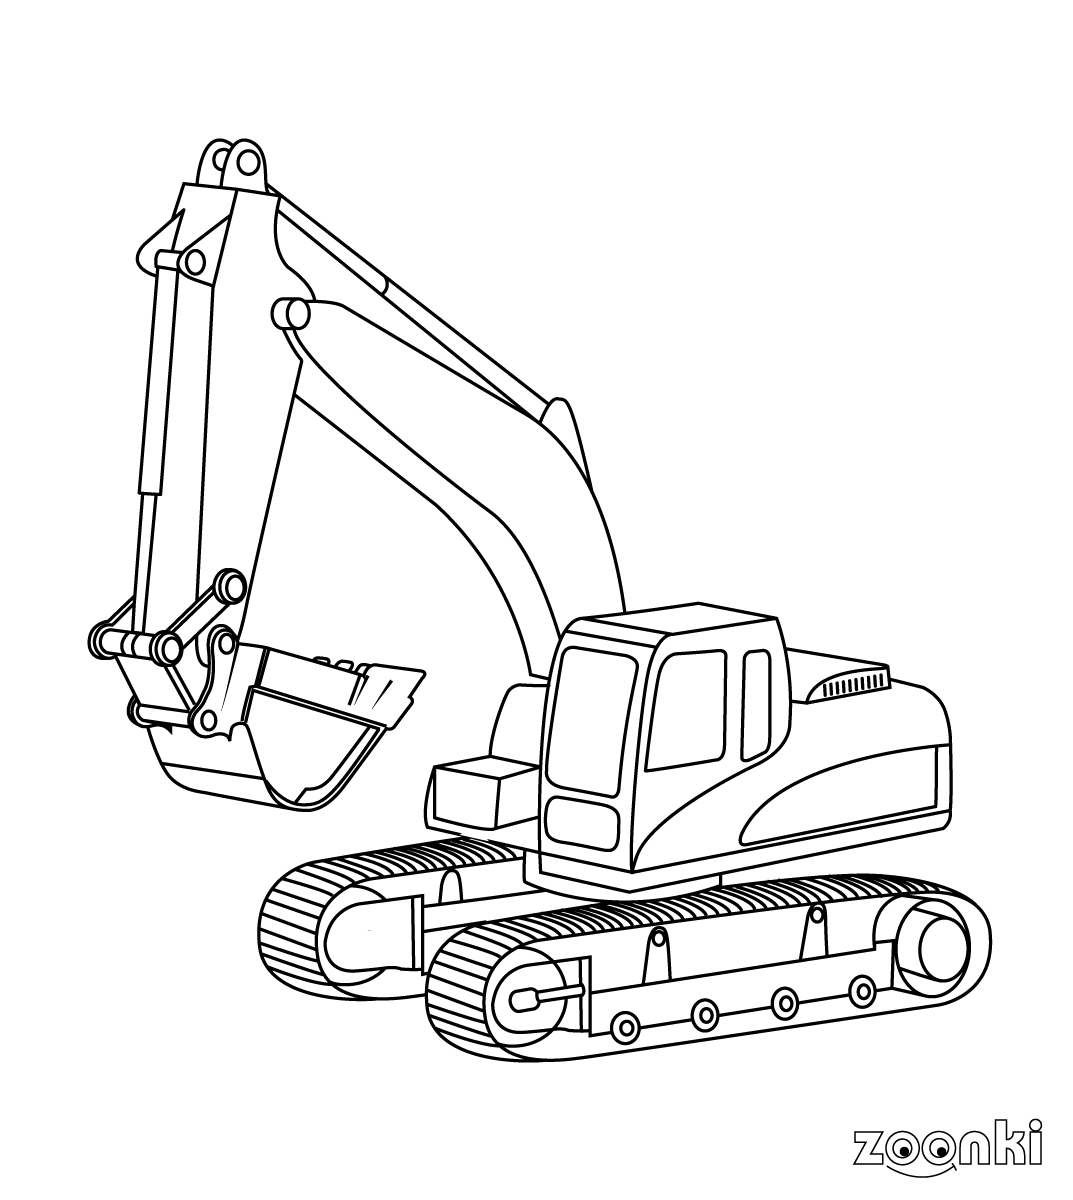 zoonki black & white excavator - digger for coloring